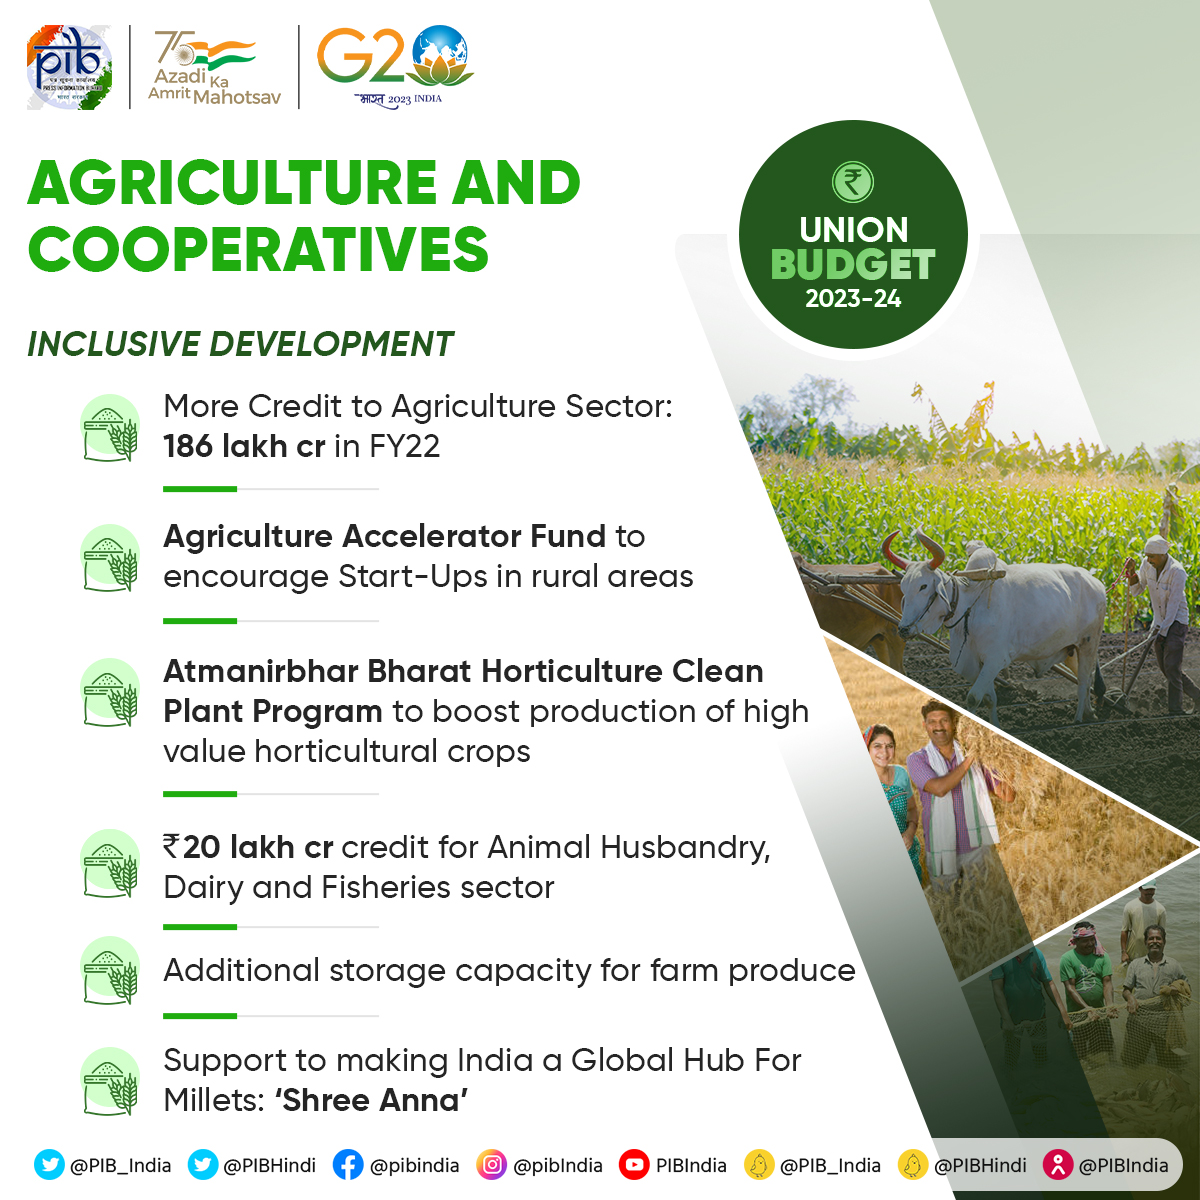 Agriculture and Cooperatives under Budget